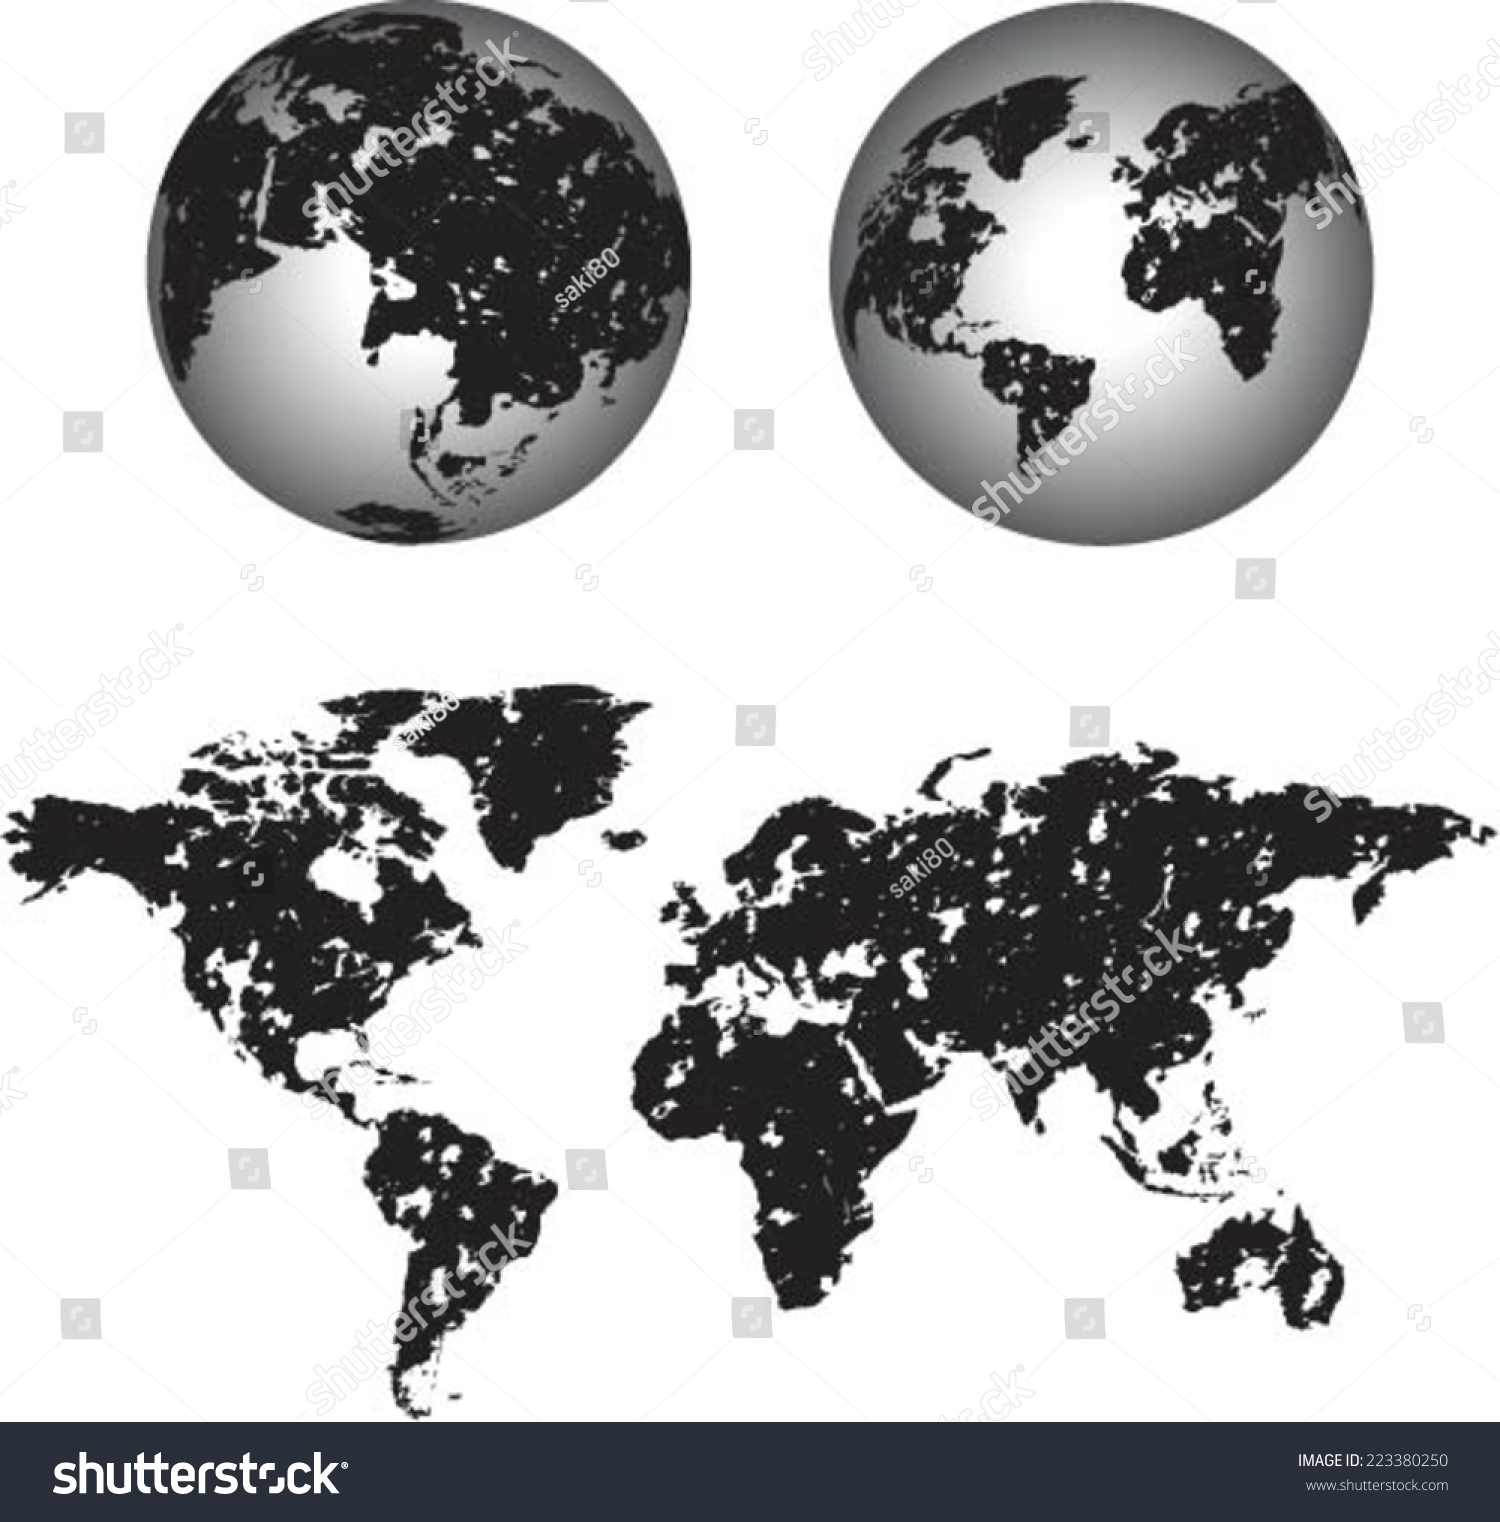 Abstract Globes Abstract World Map Stock Vector 223380250 - Shutterstock